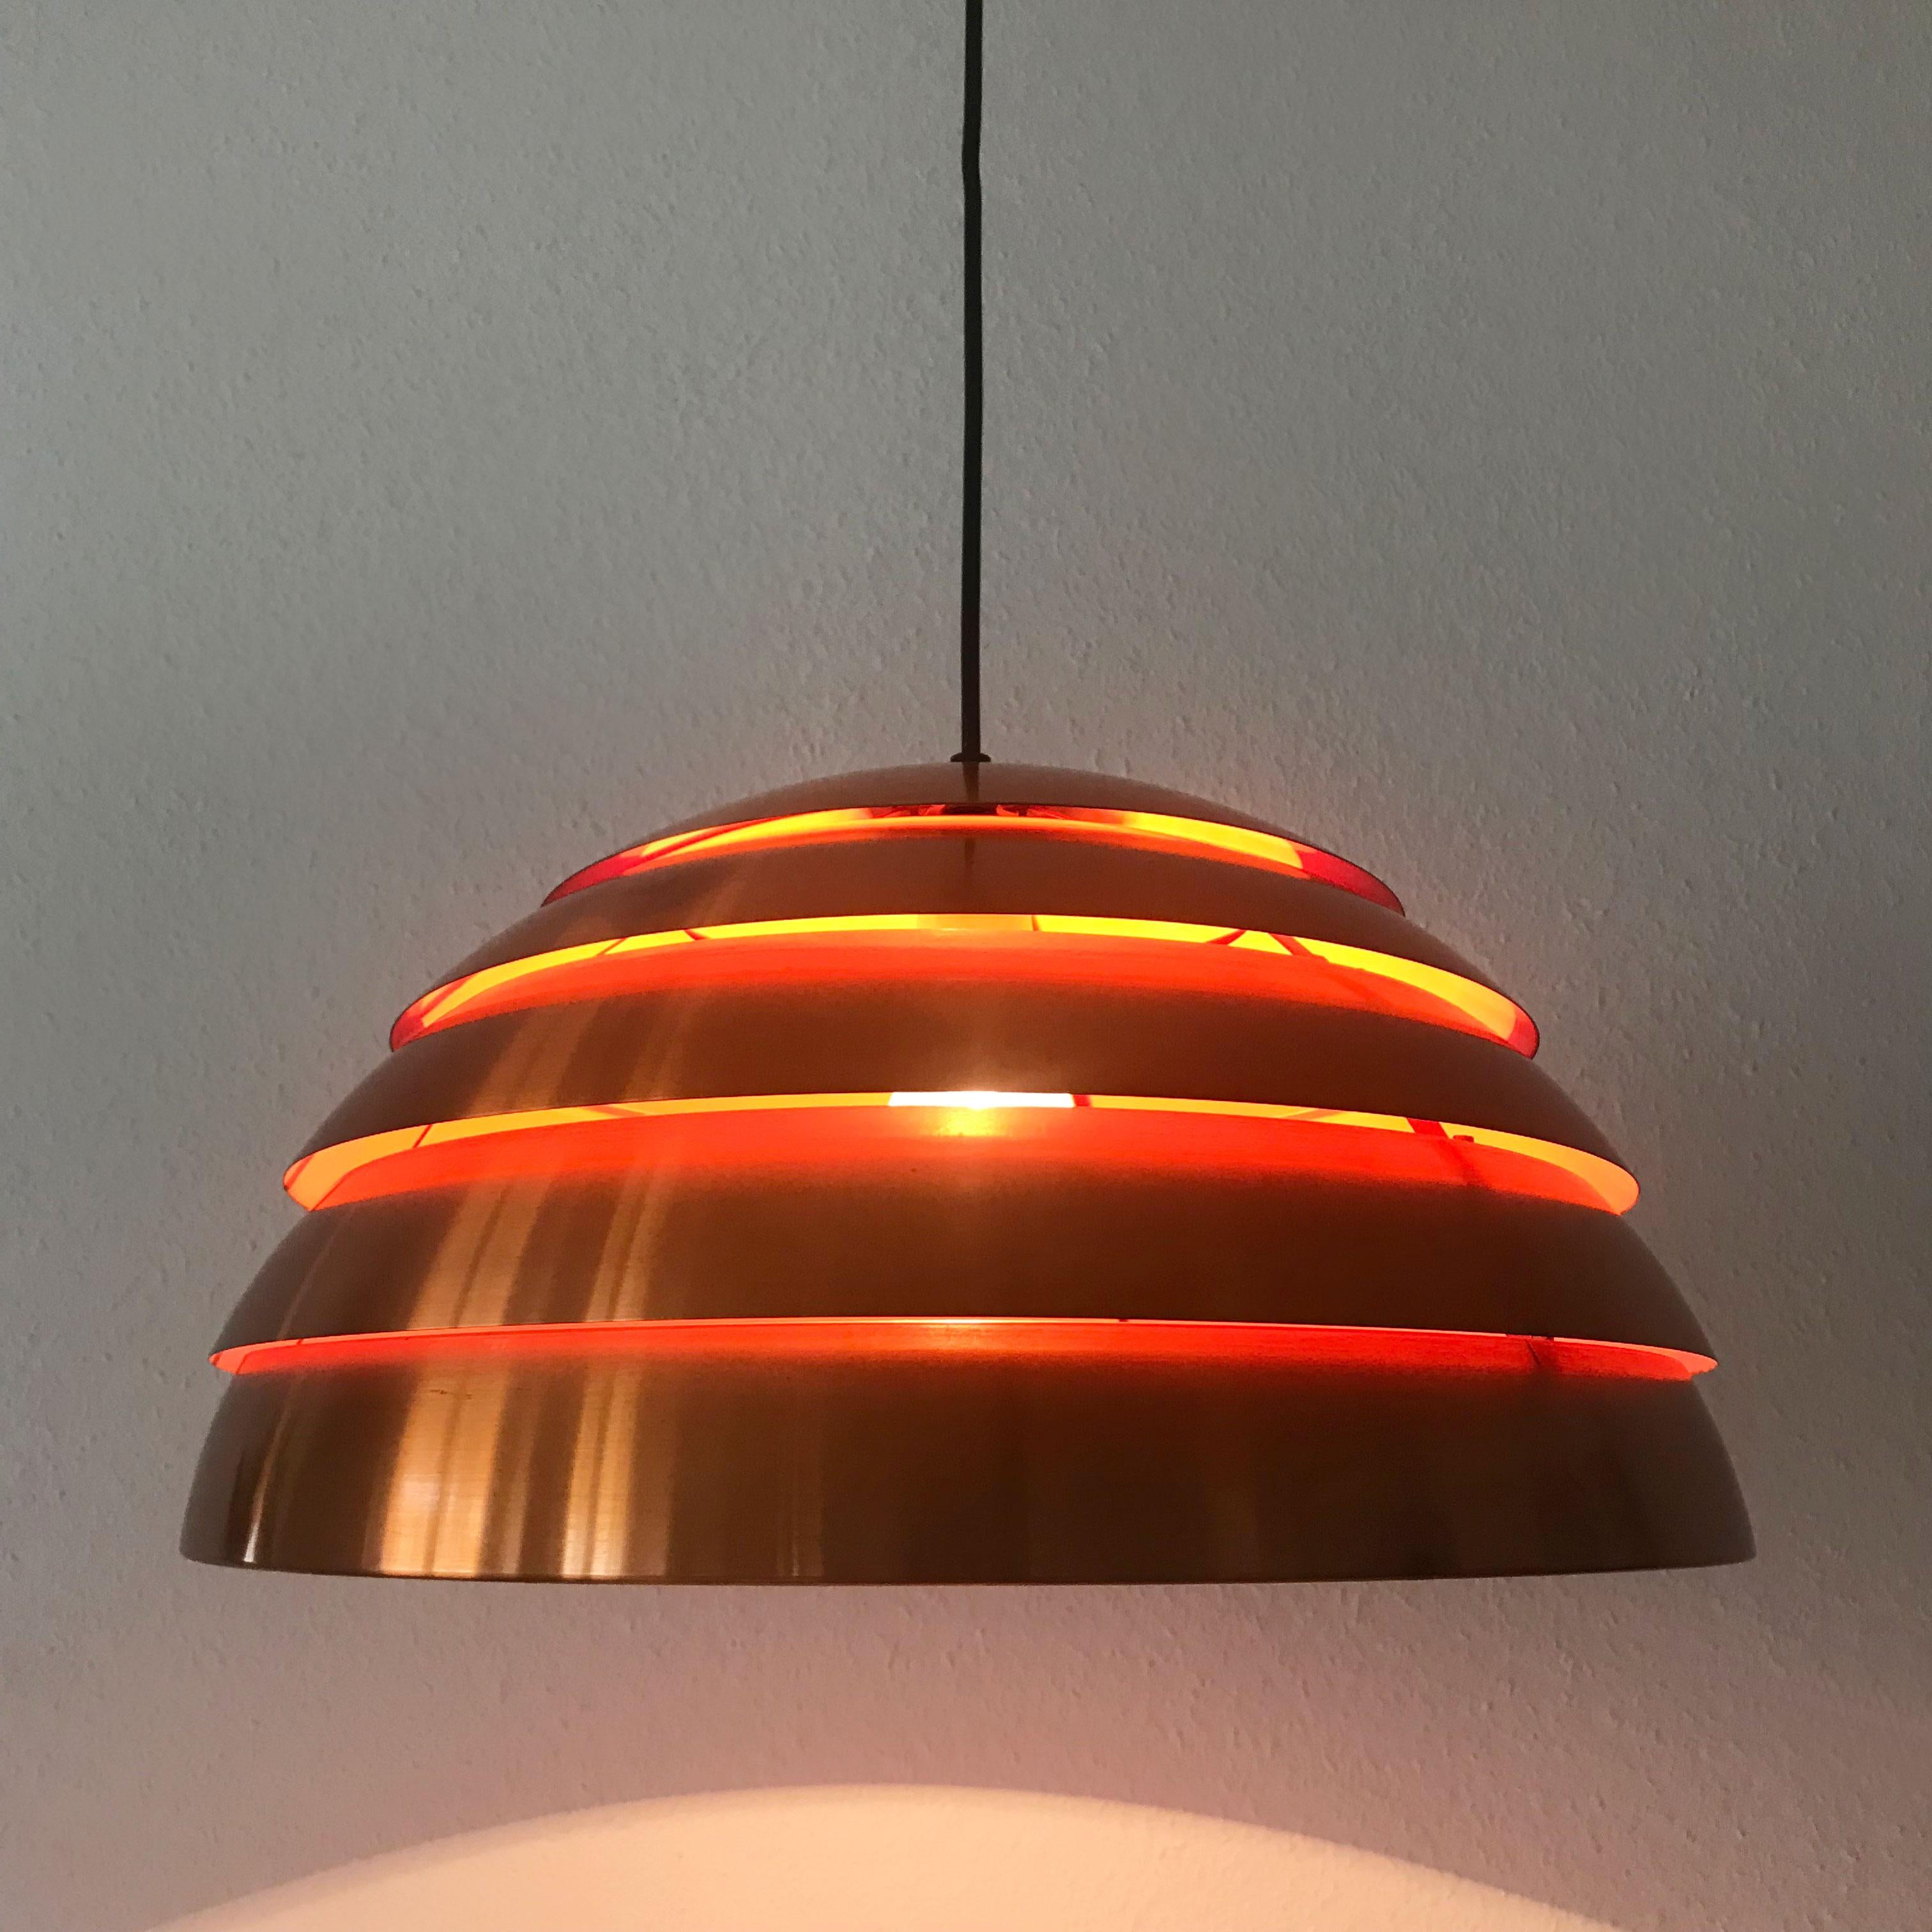 Extremely rare, large Mid-Century Modern copper beehive pendant lamp by Hans-Agne Jakobsson for Hans-Agne Jakobsson AB, company in Markaryd, Sweden, 1960s. 

Executed in copper anodized solid brass sheet. Inside in orange color lacquered. The lamp